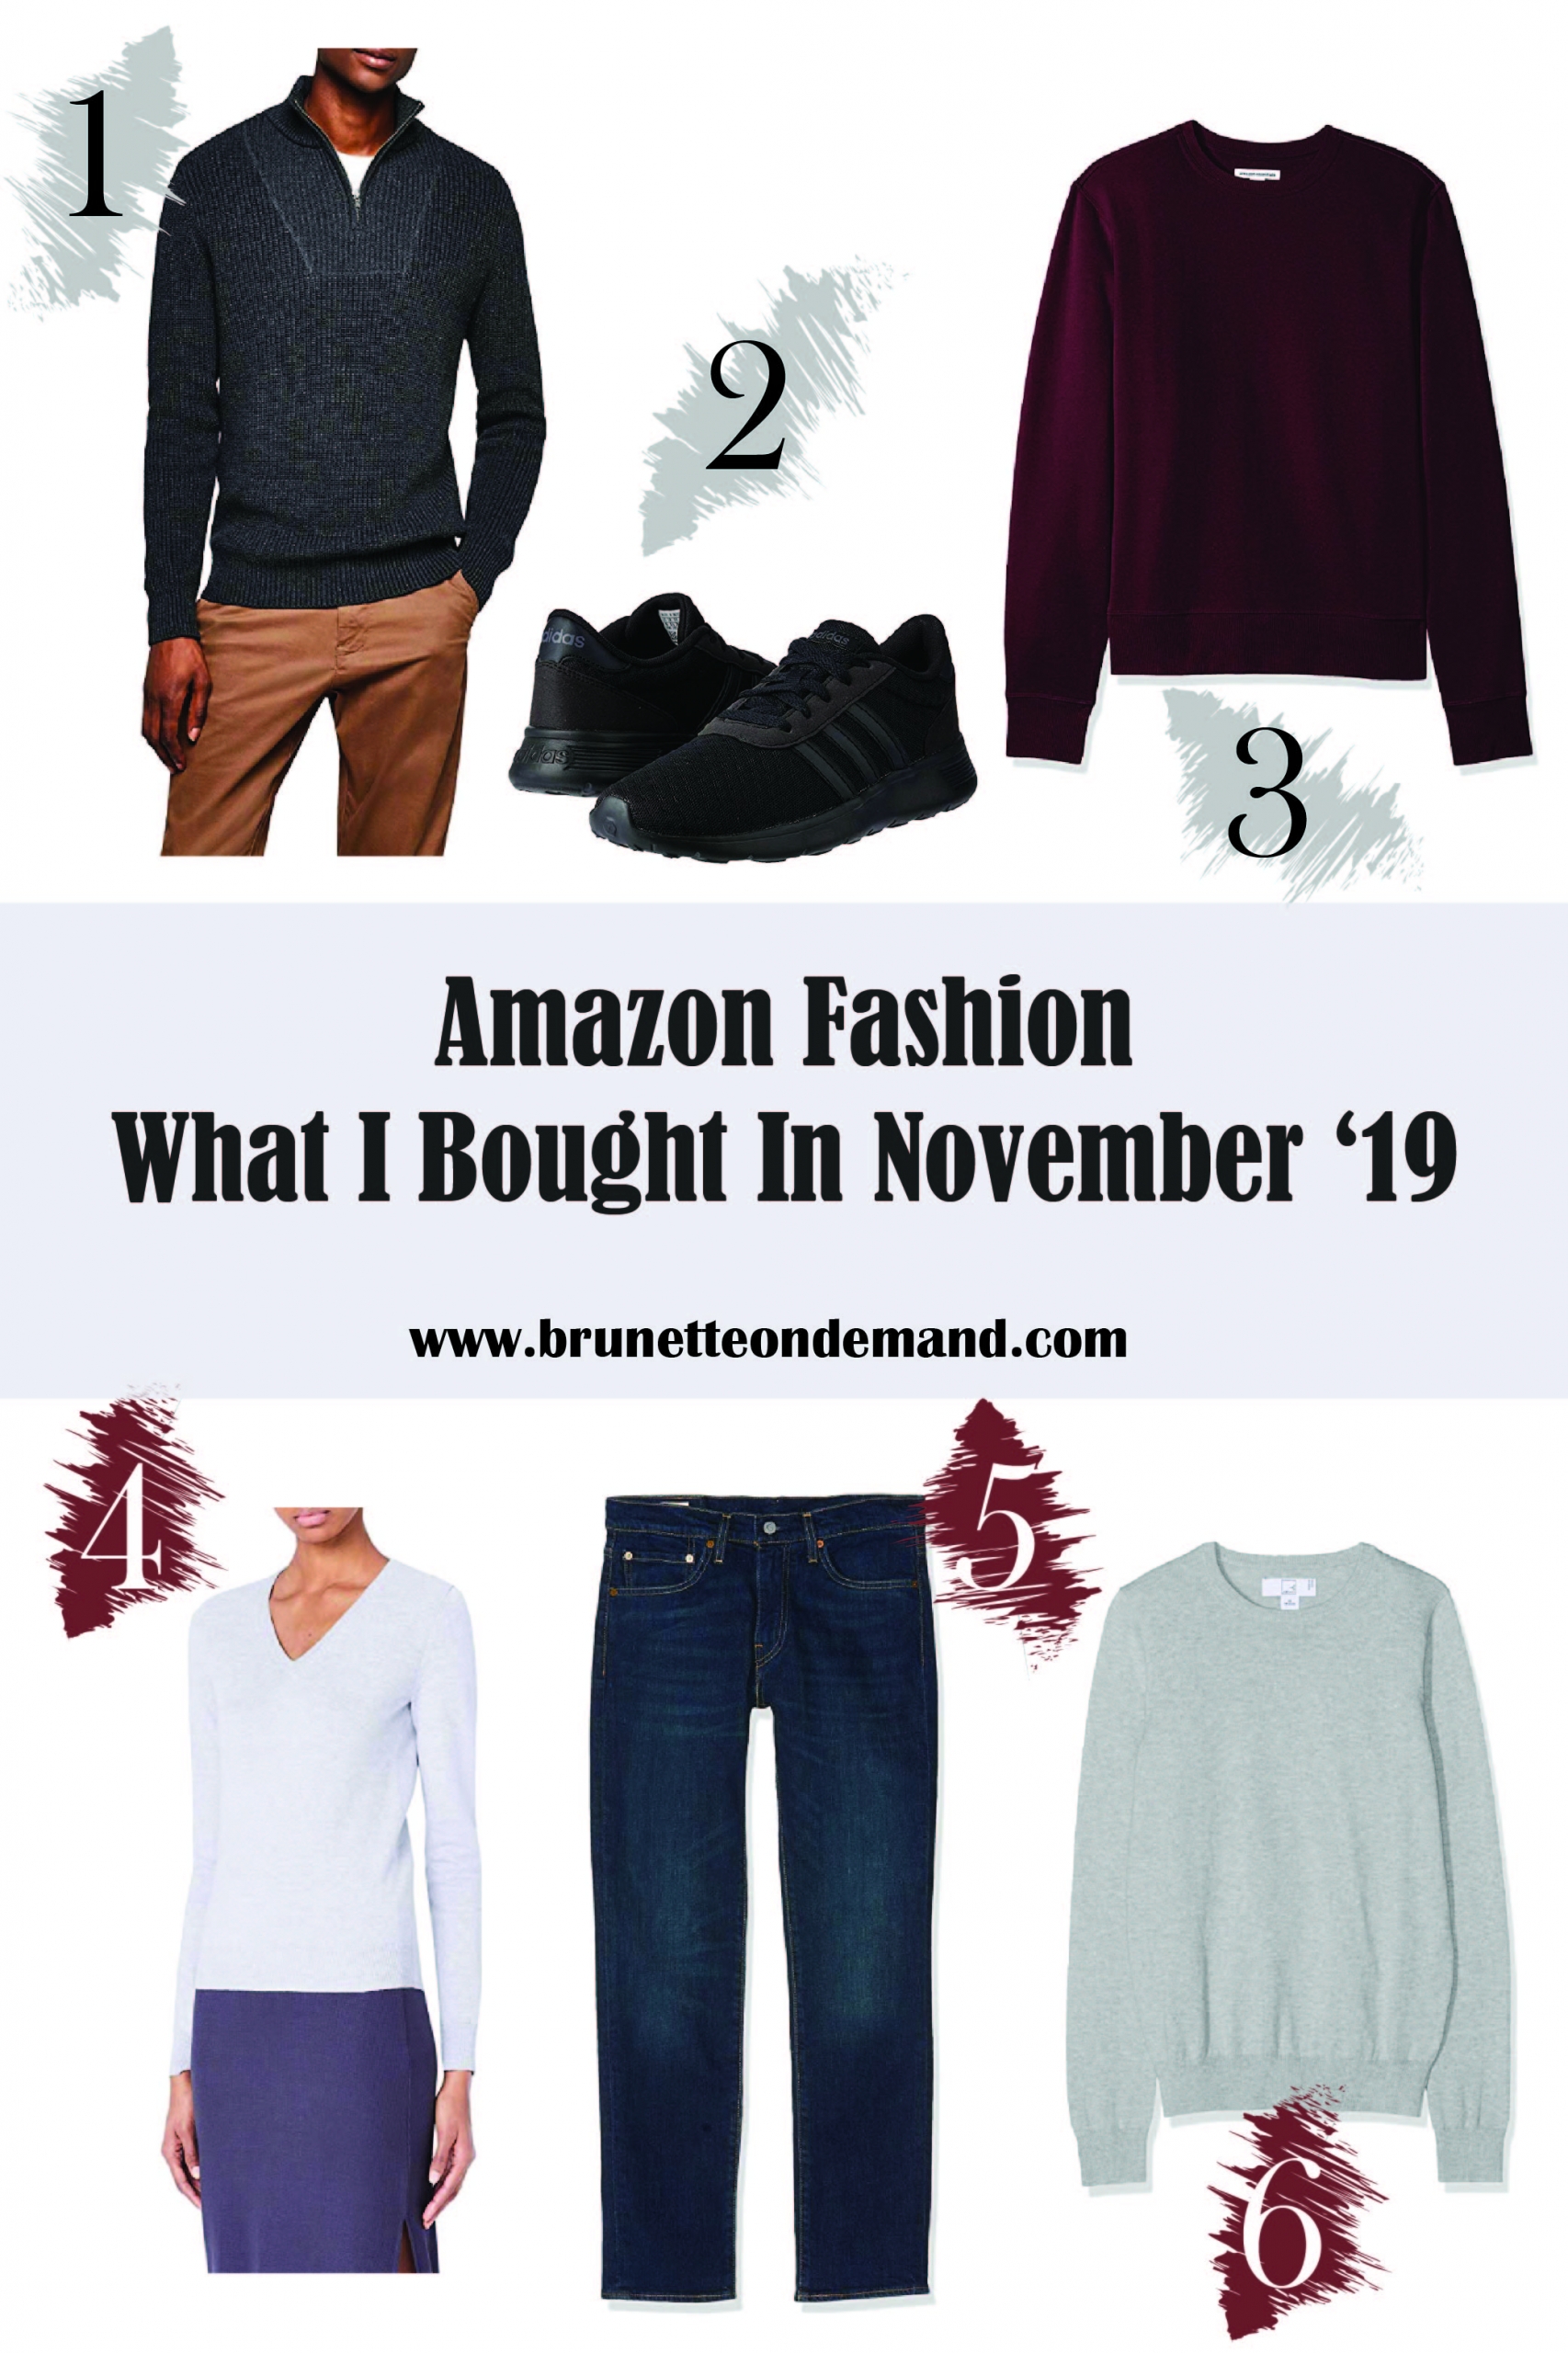 Amazon Fashion What I Bought In November '19